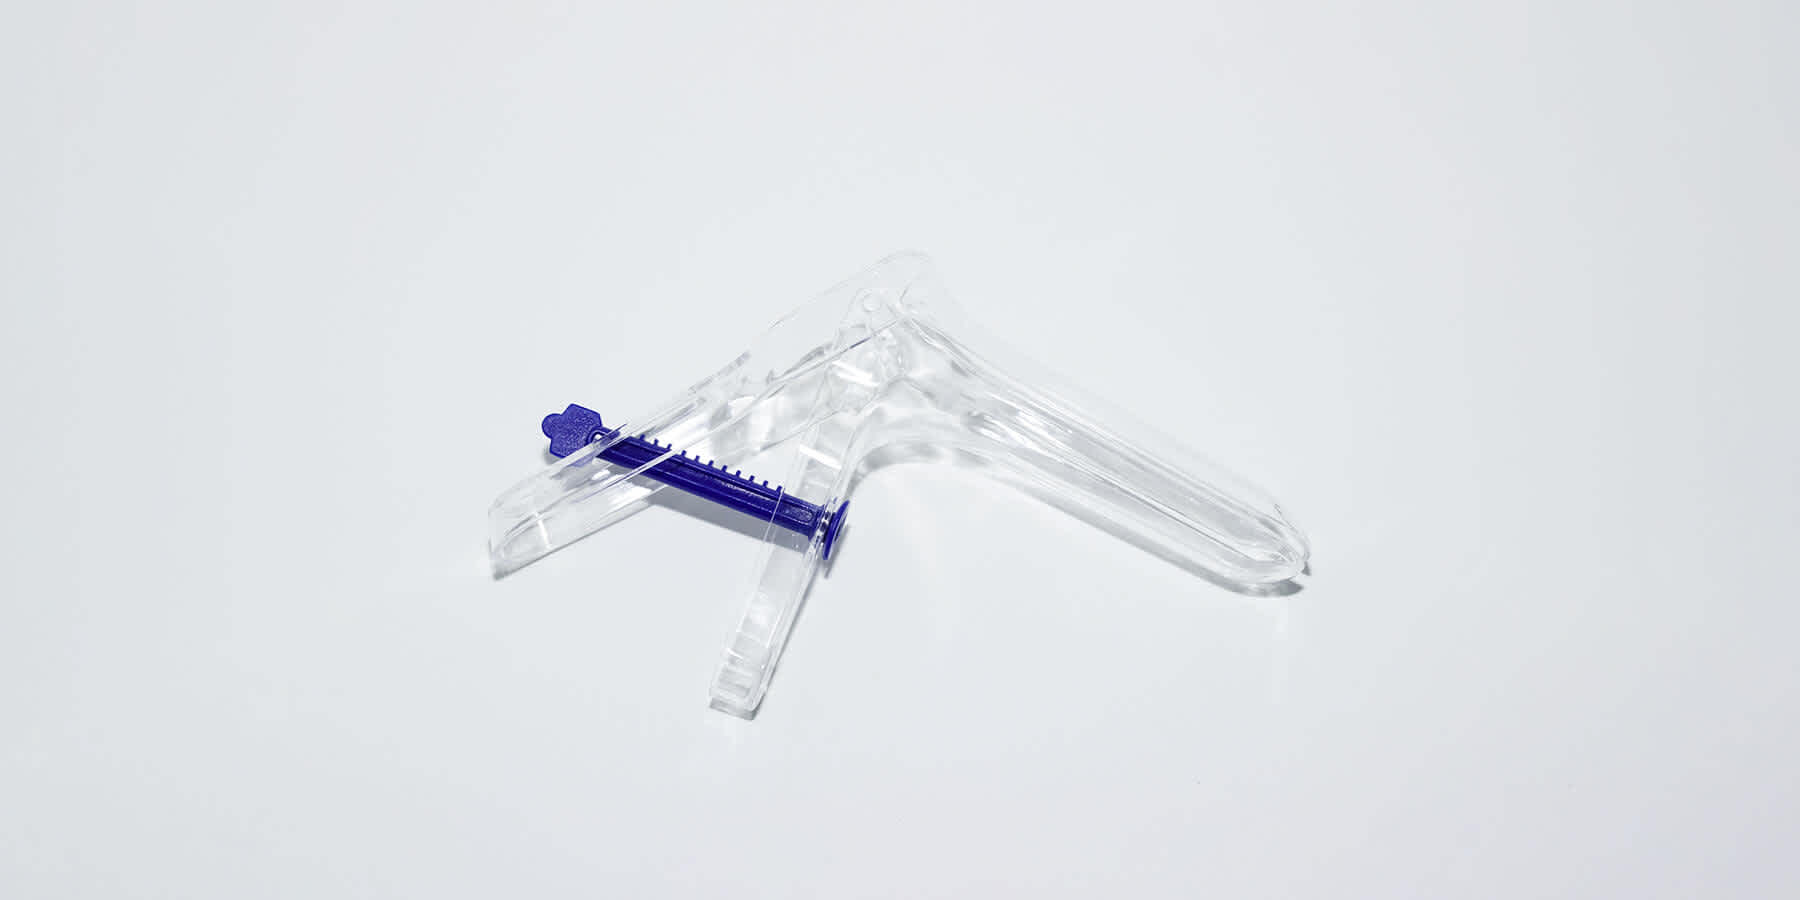 Plastic vaginal speculum used for HPV screening via pap smear test